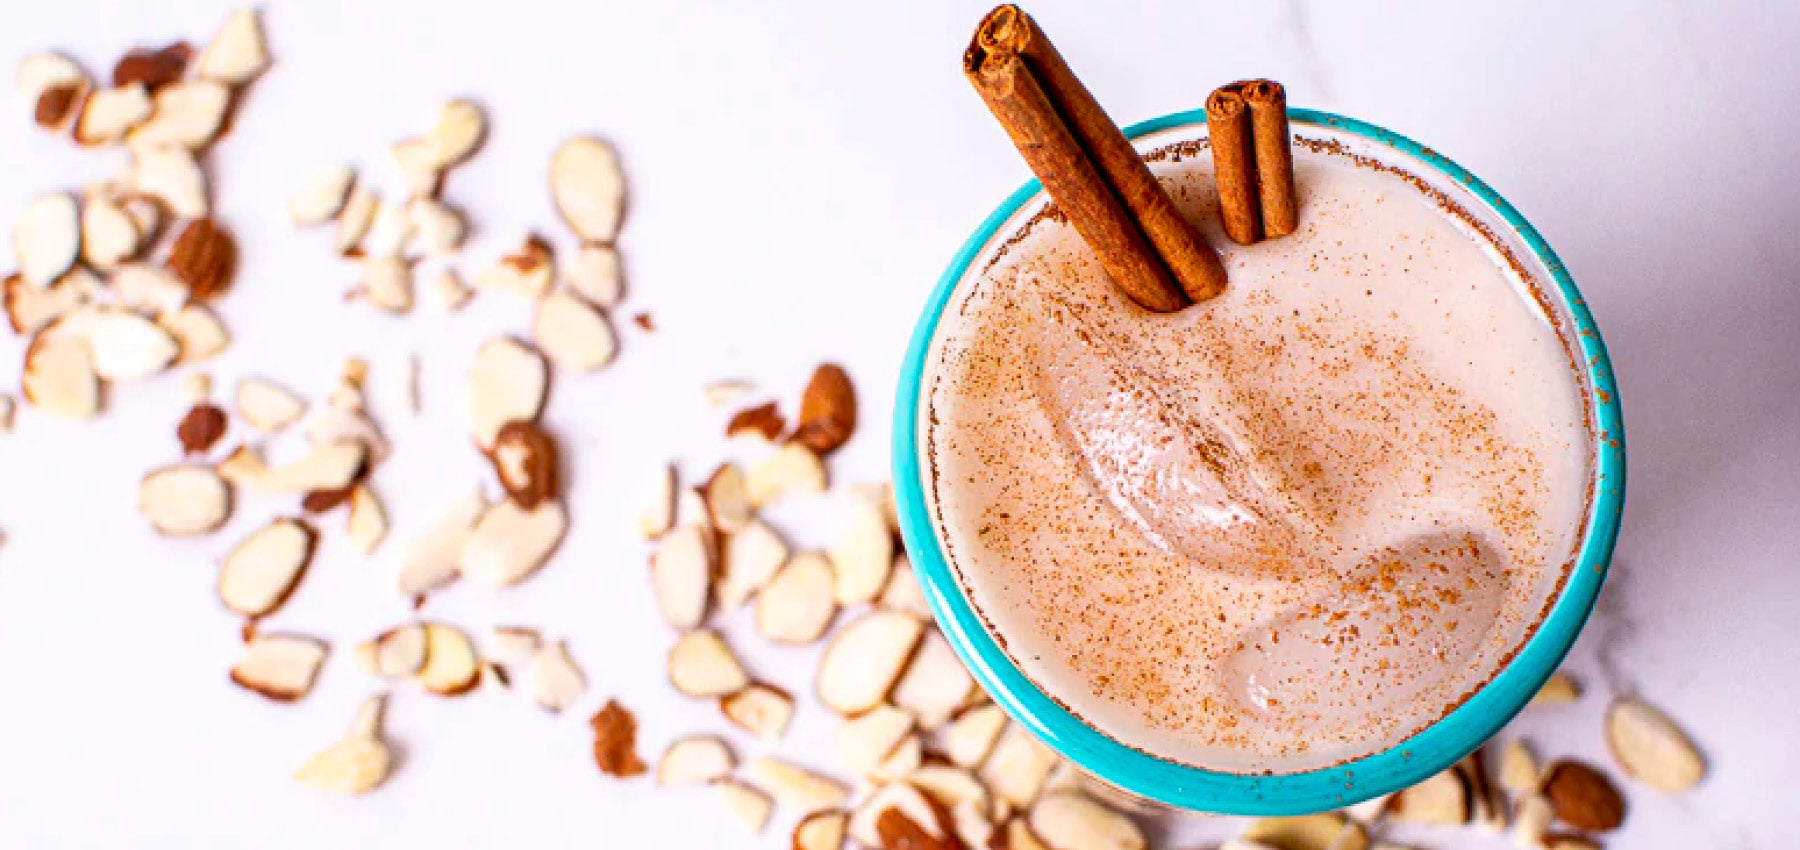 Horchata with cinnamon sticks and sliced almonds